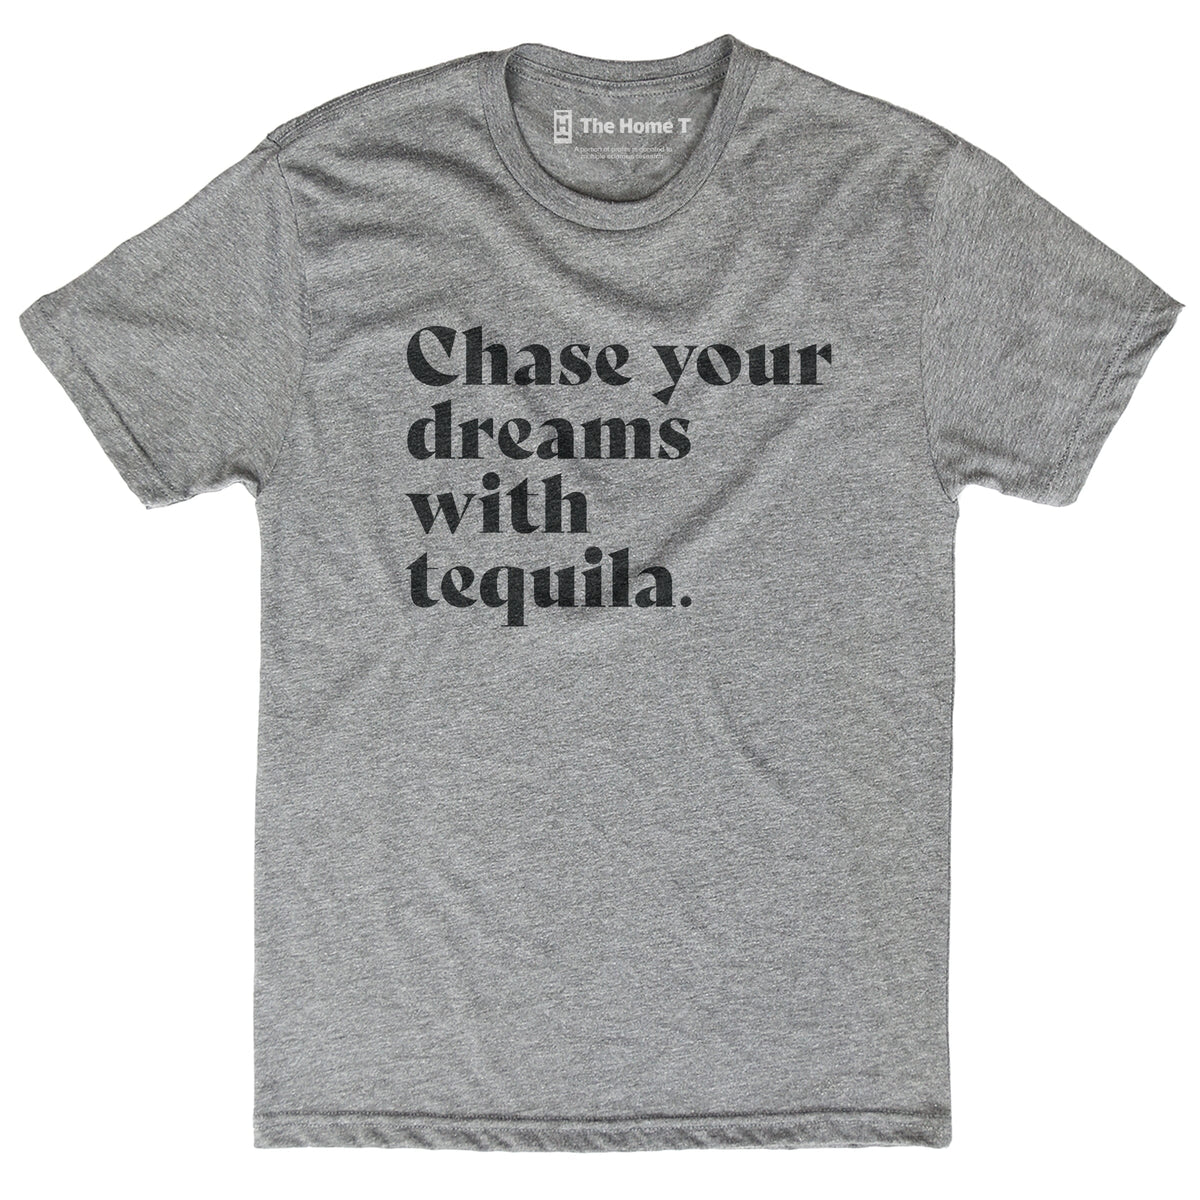 Chase Your Dreams with Tequila